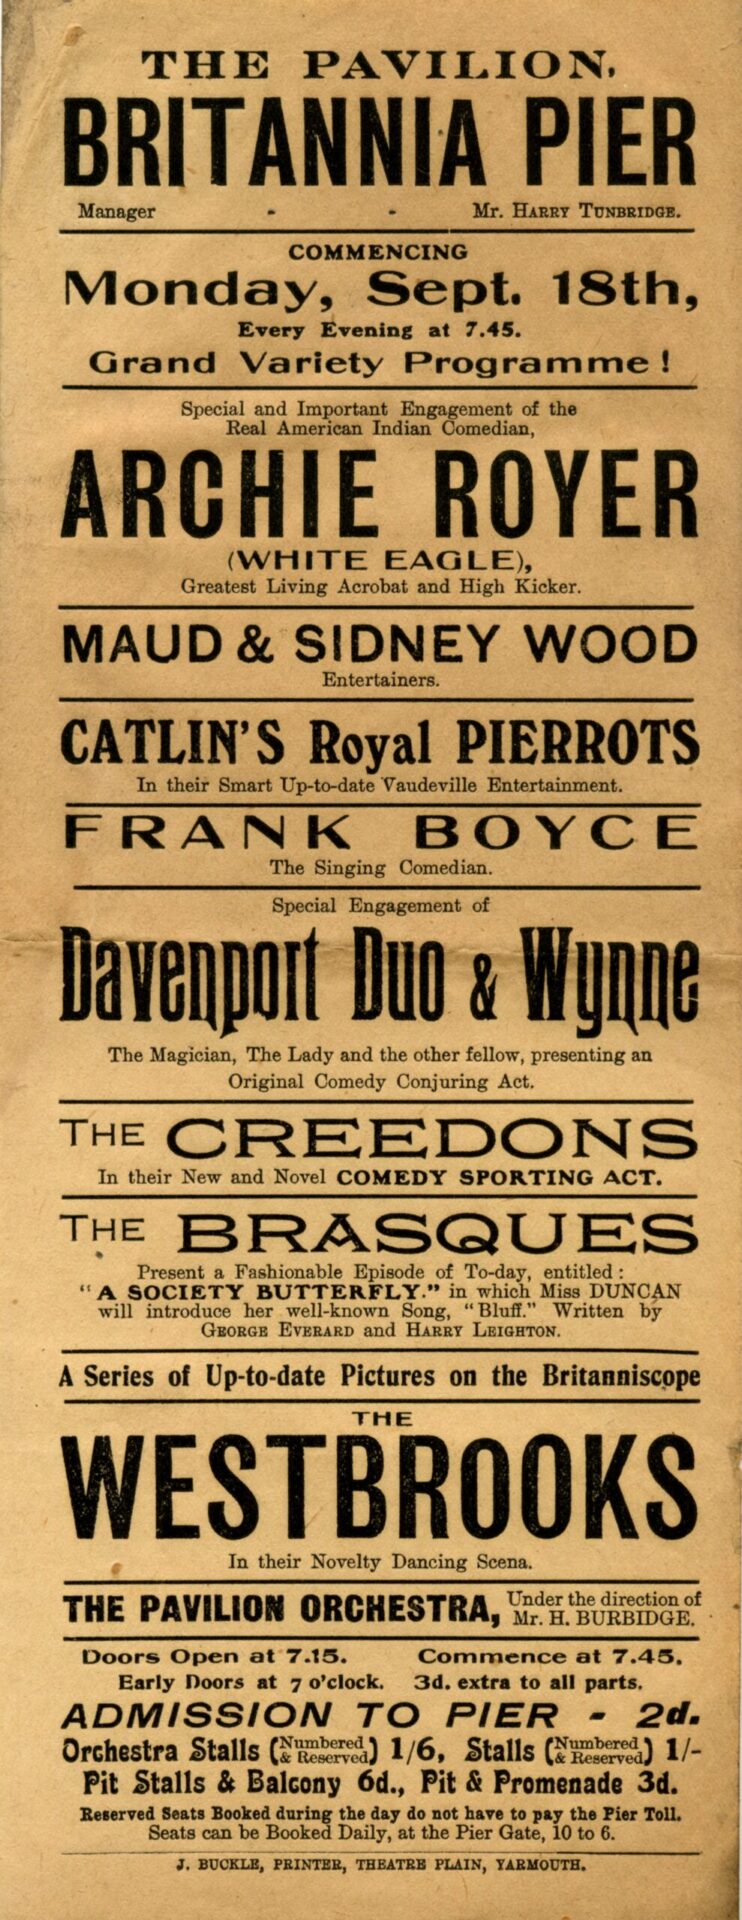 Handbill for the Pavilion, Britannia Pier, Great Yarmouth. Week commencing 18 September 1911